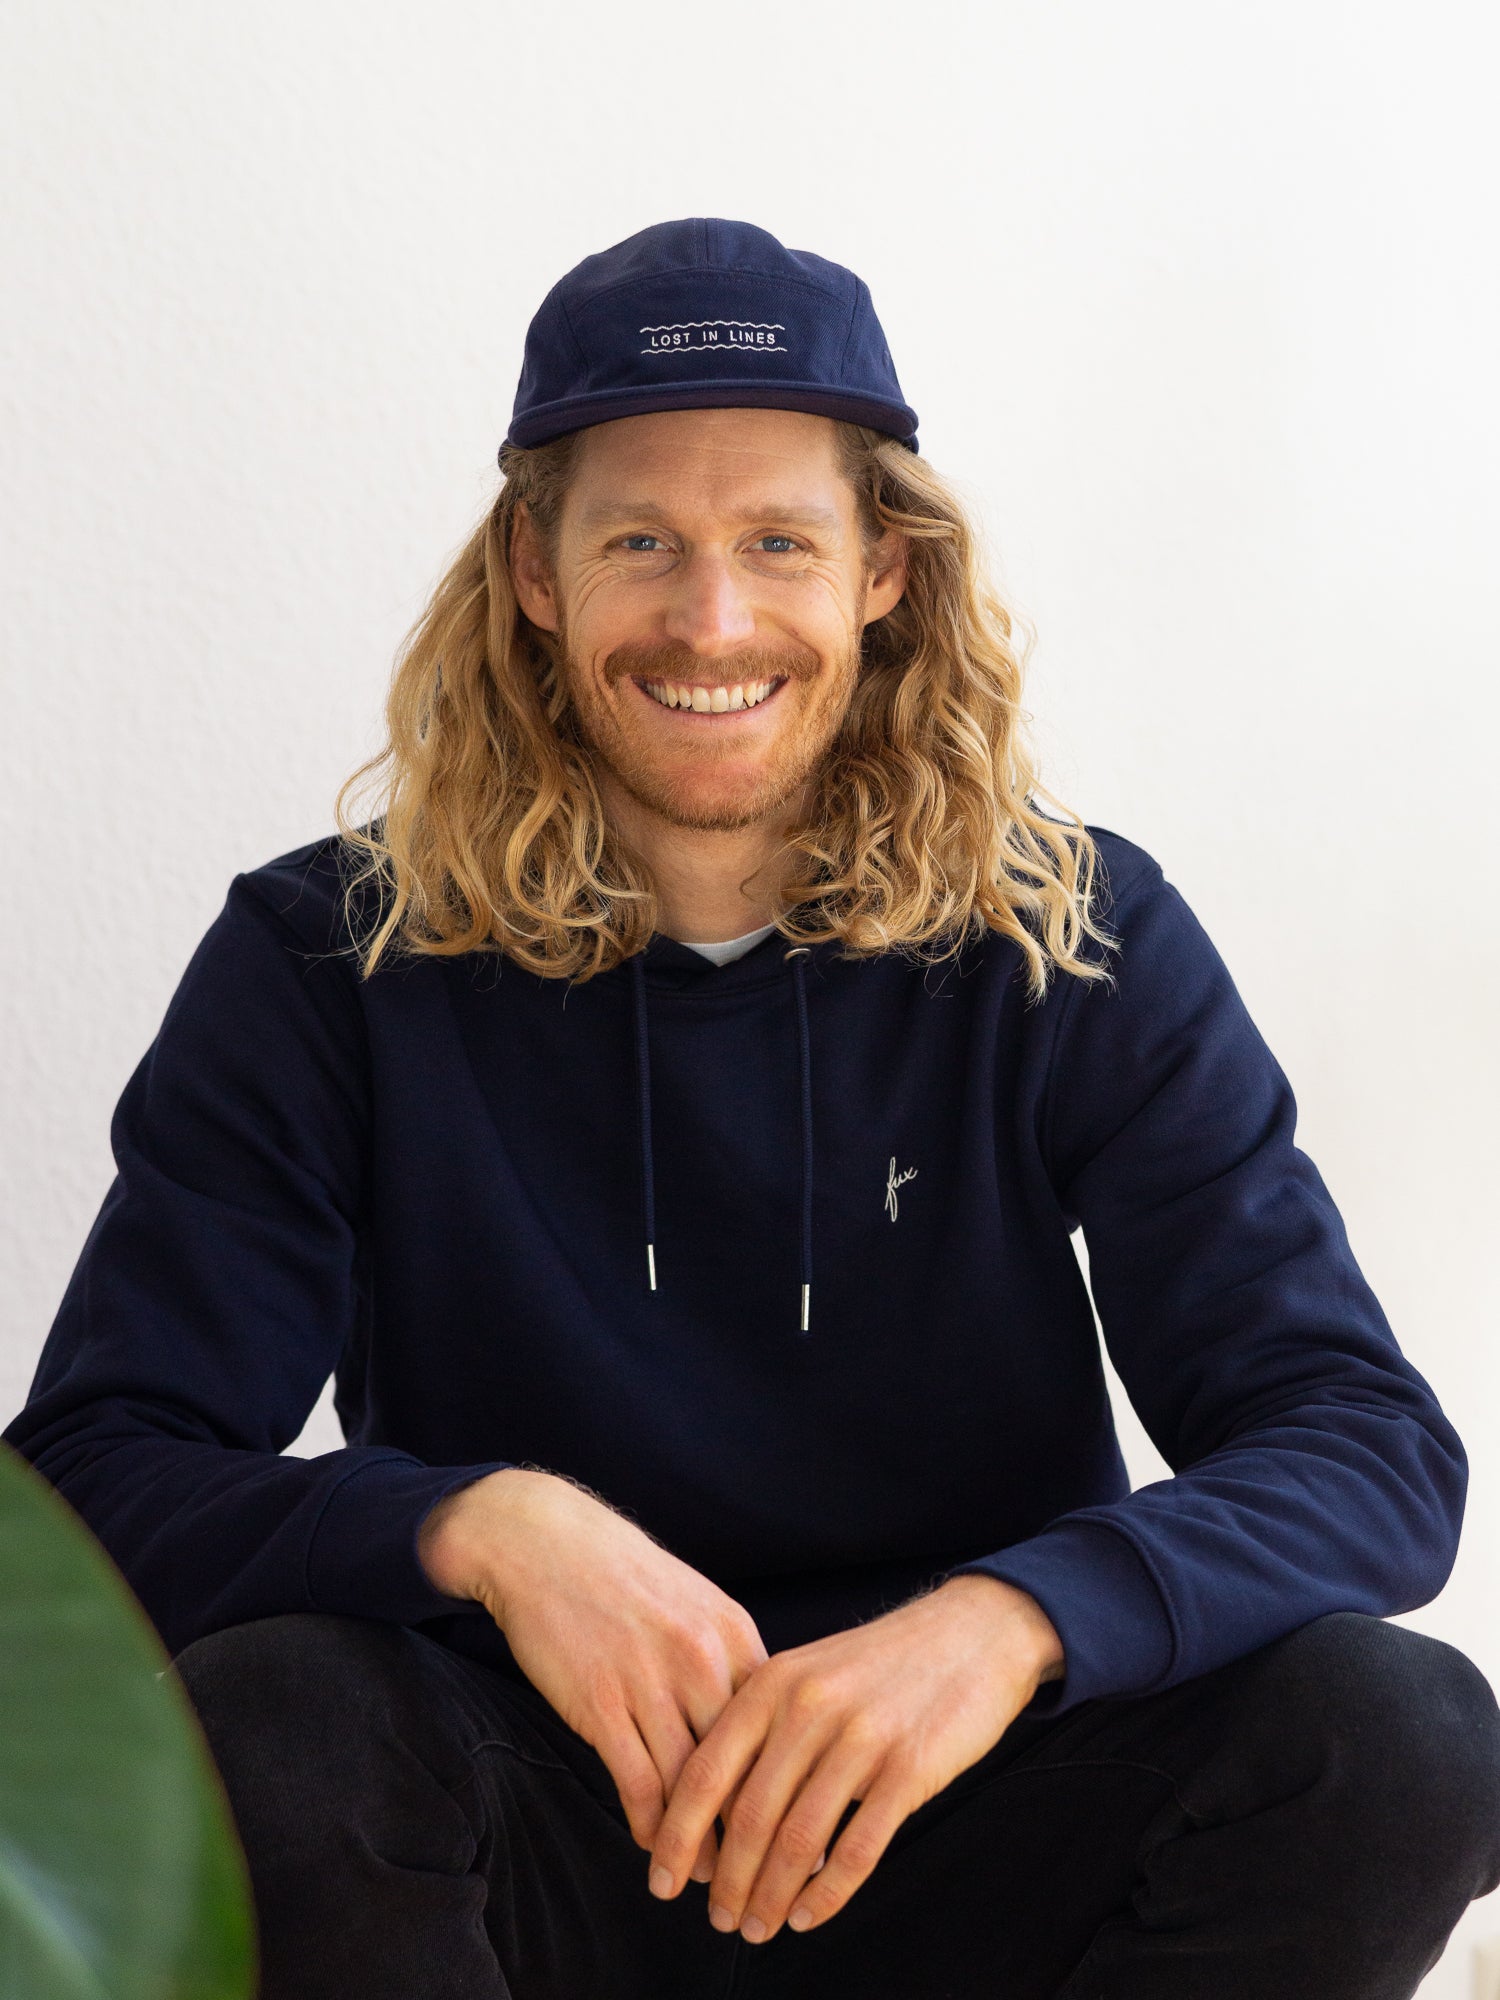 Mo trägt unsere FUXBAU Lost in Lines Cap mit Stick